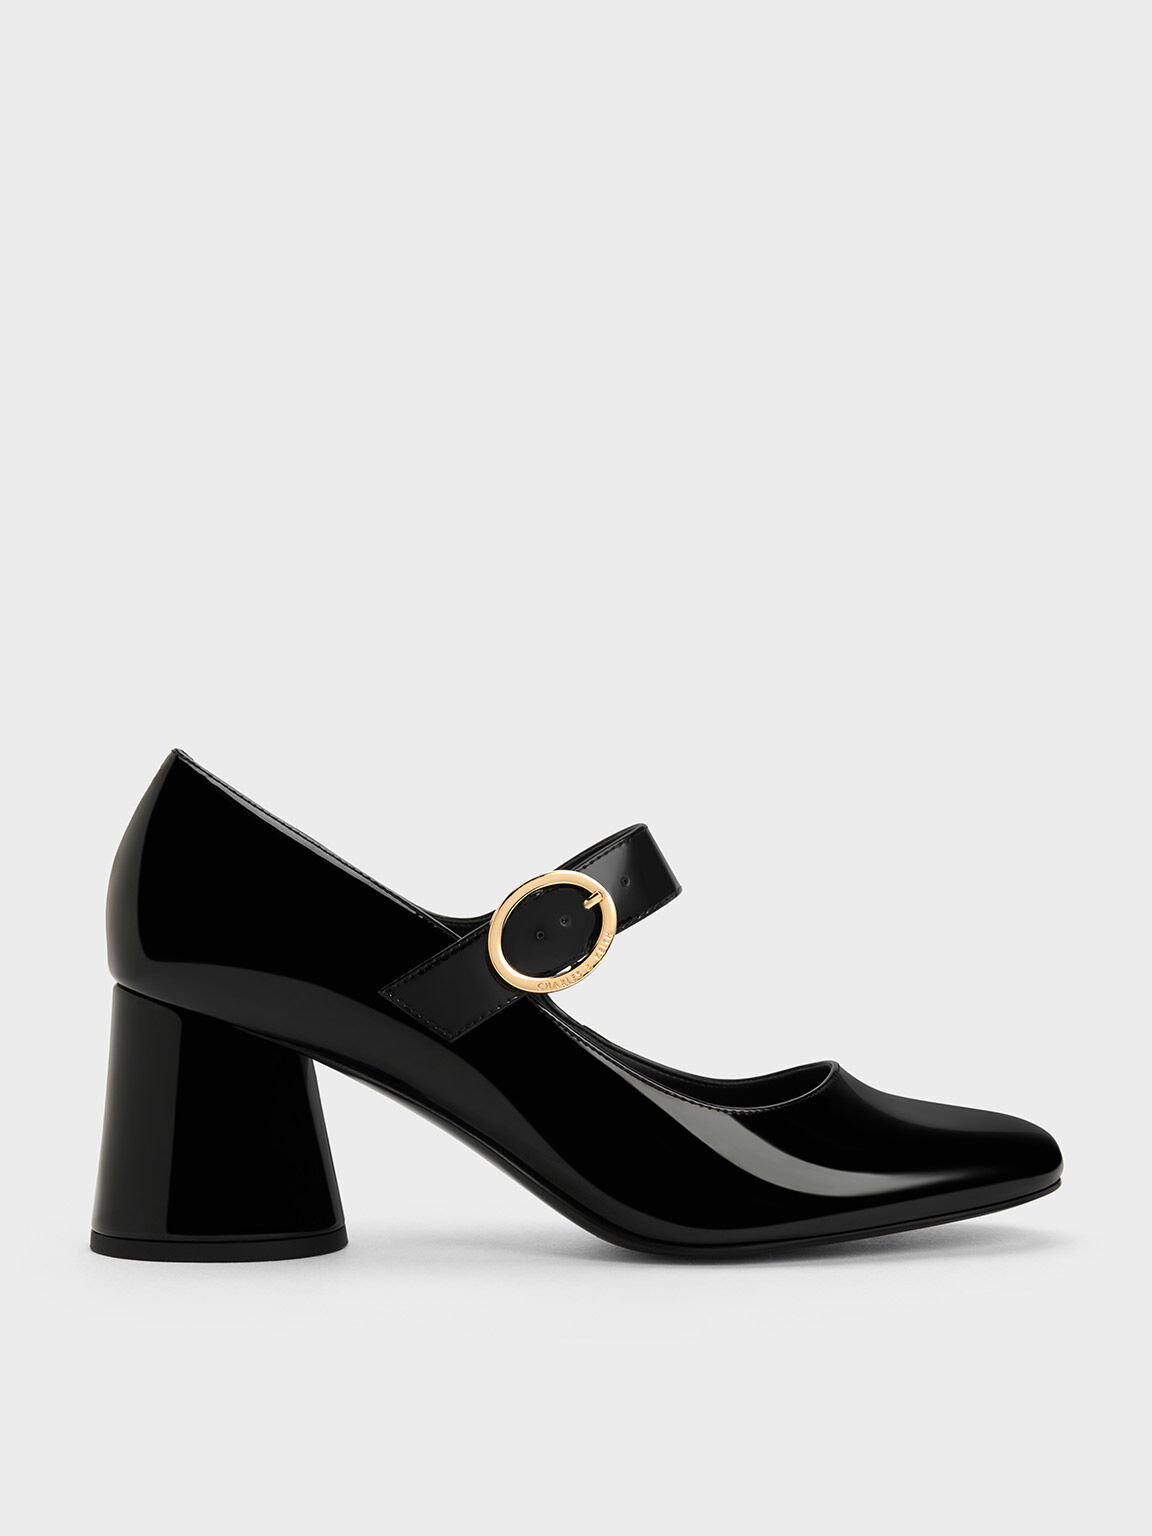 Black Patent Patent Cylindrical Block Heel Mary Janes - CHARLES & KEITH KW